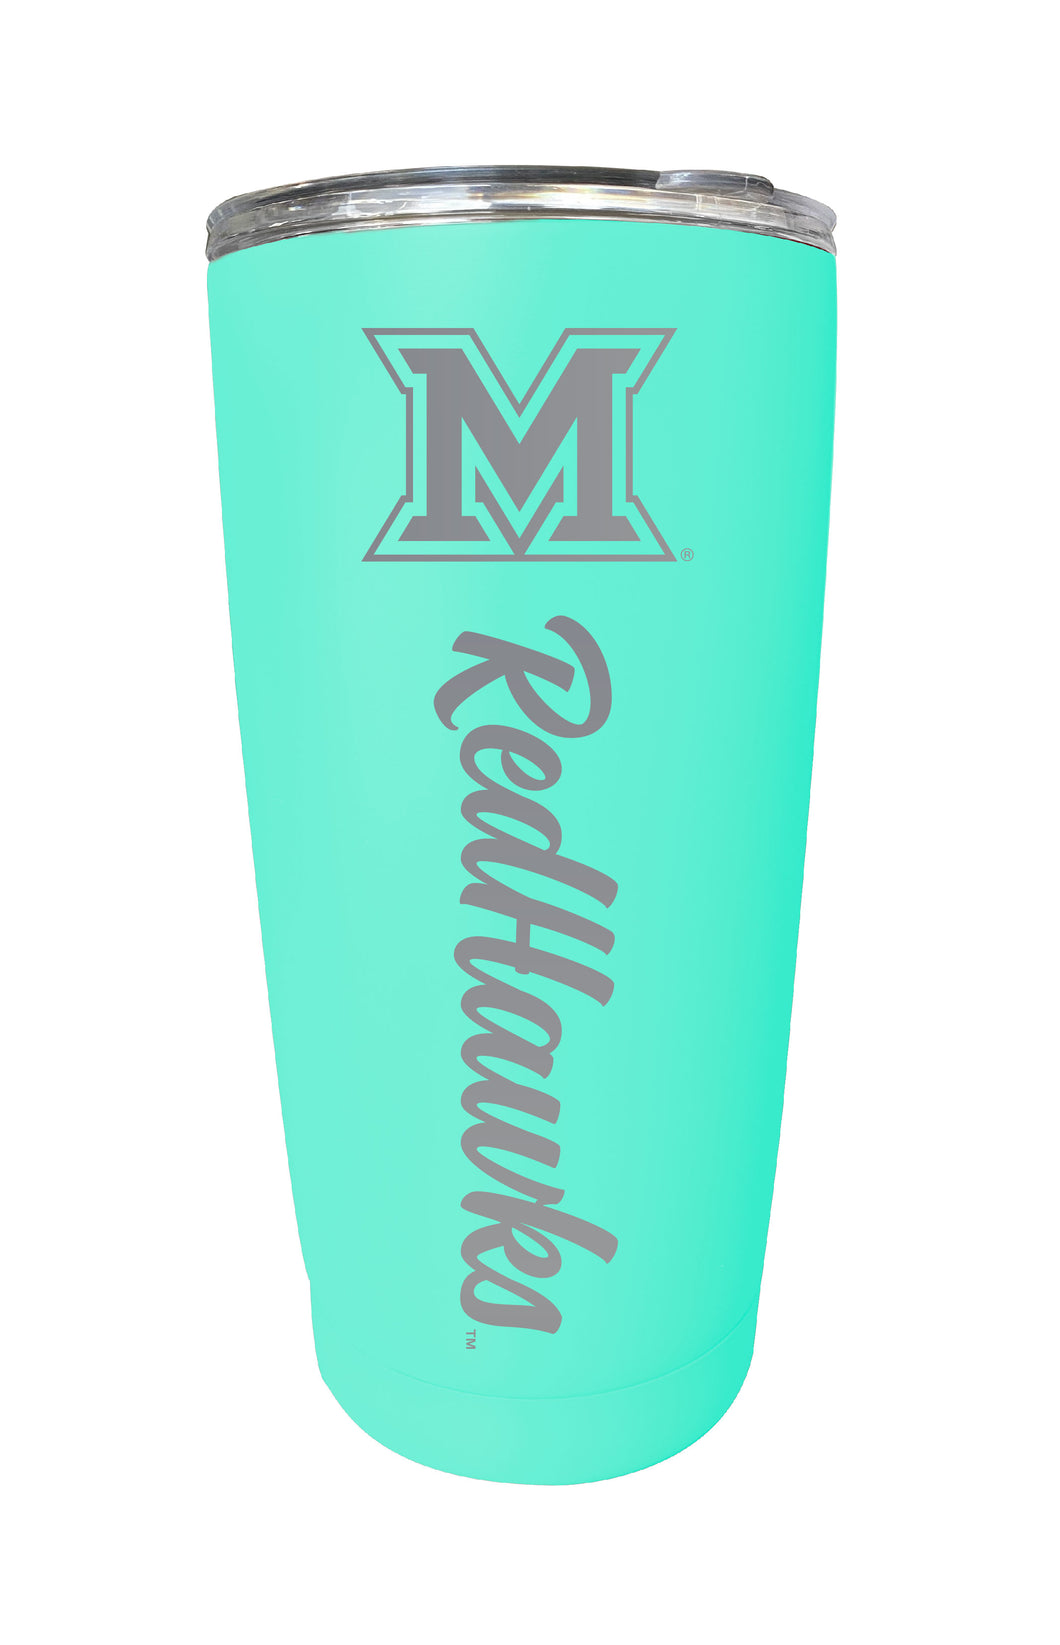 Miami of Ohio 16 oz Stainless Steel Etched Tumbler - Choose Your Color